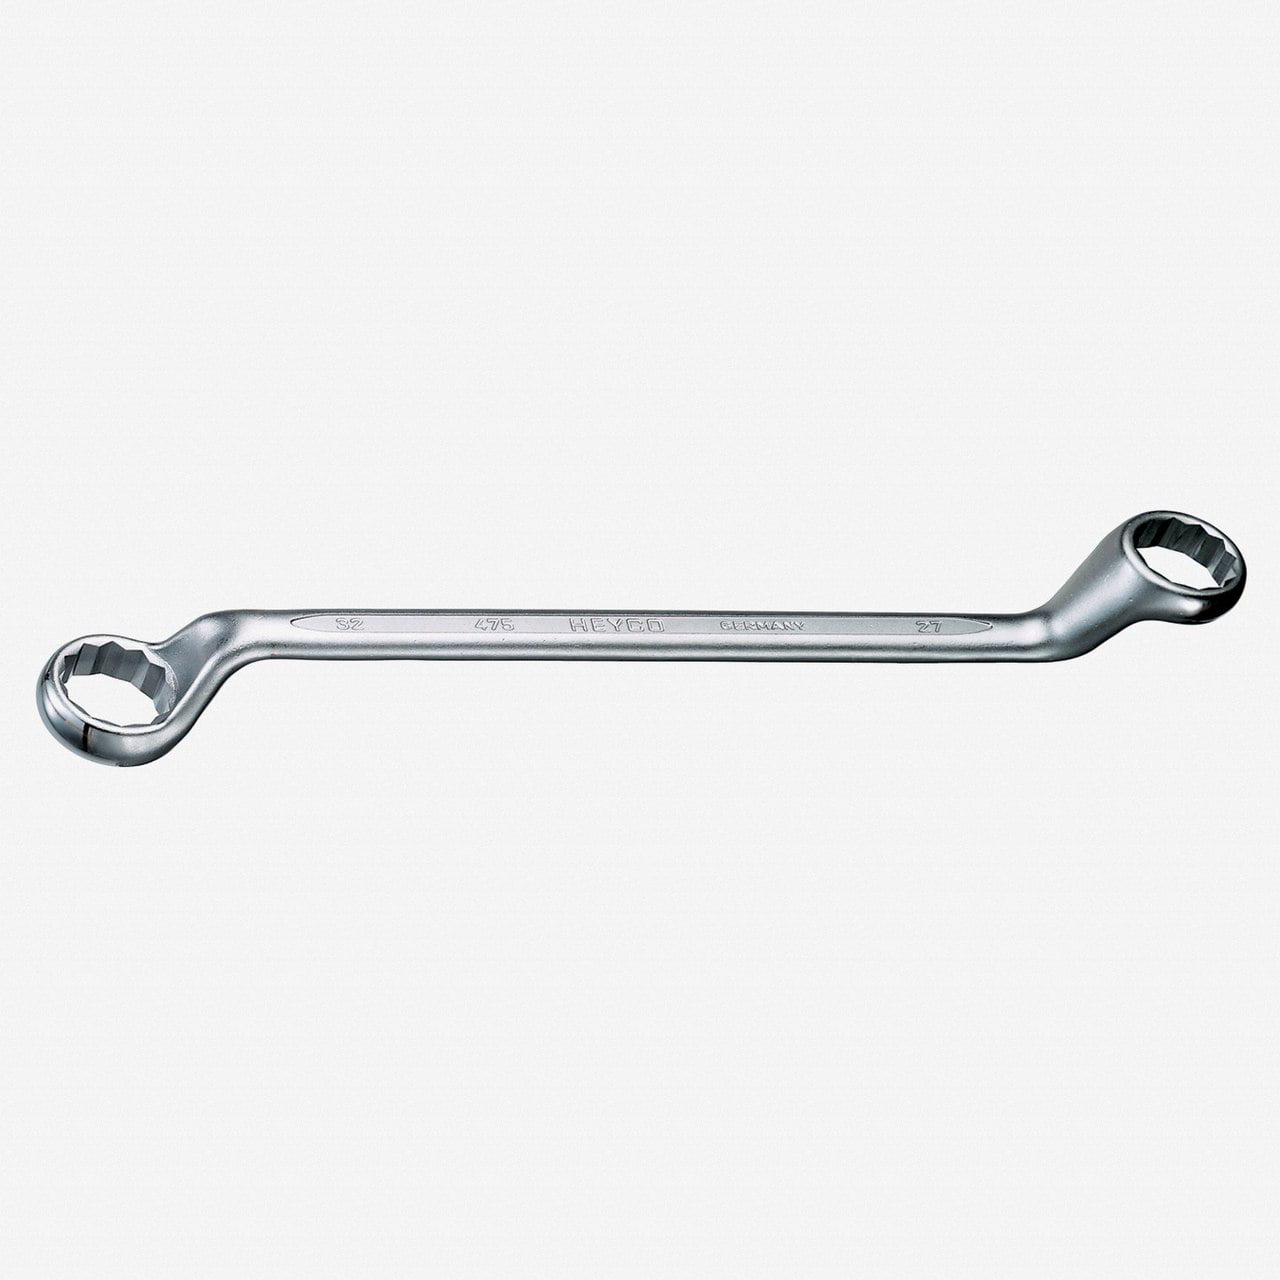 20.0mm-by-22.0mm Wiha 47509 Box End Wrench Metric 